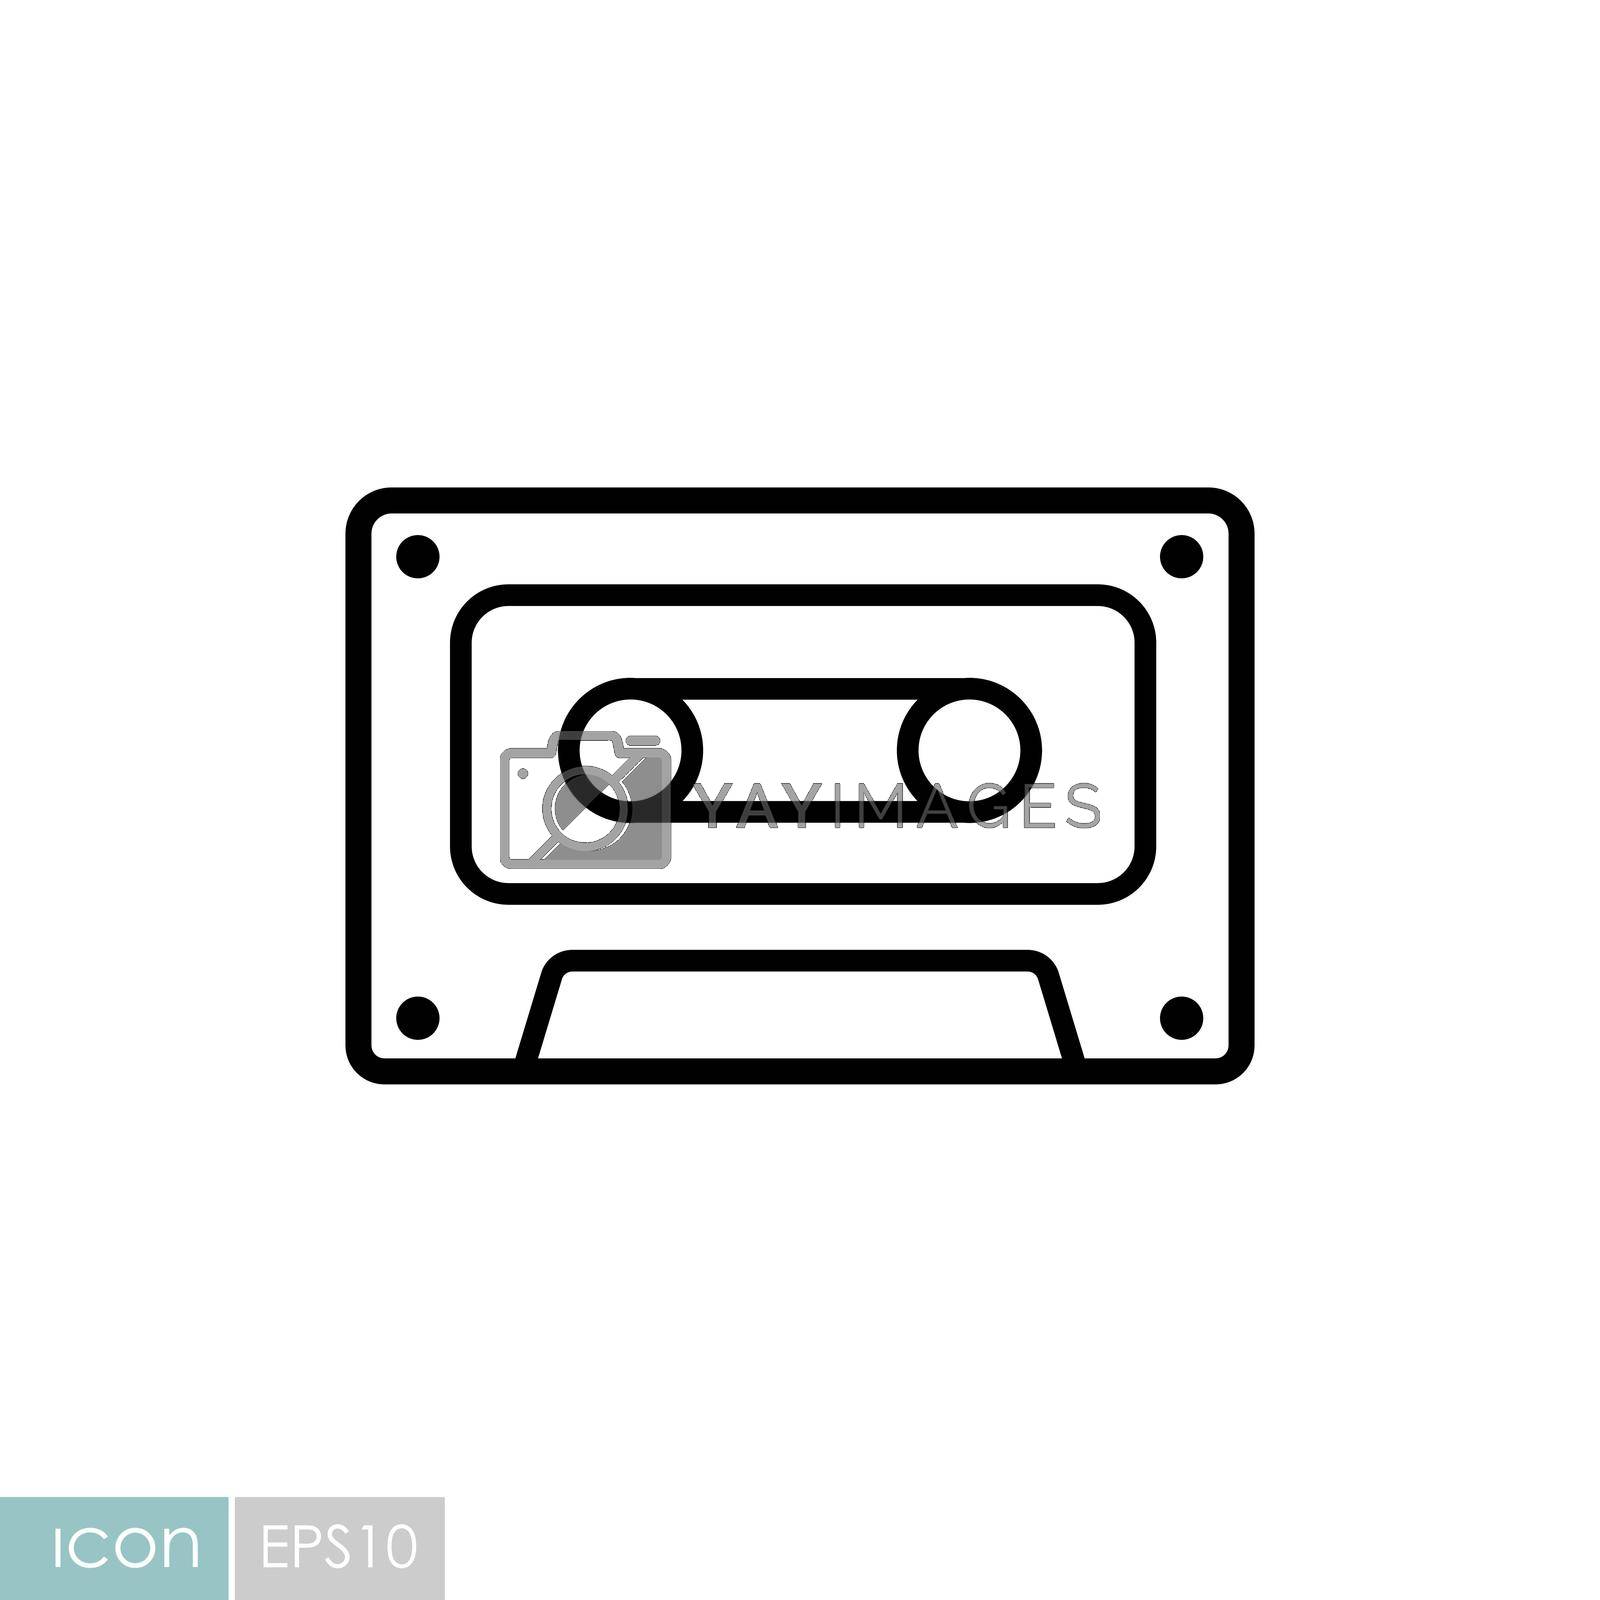 Royalty free image of Audio cassette tape vector icon by nosik